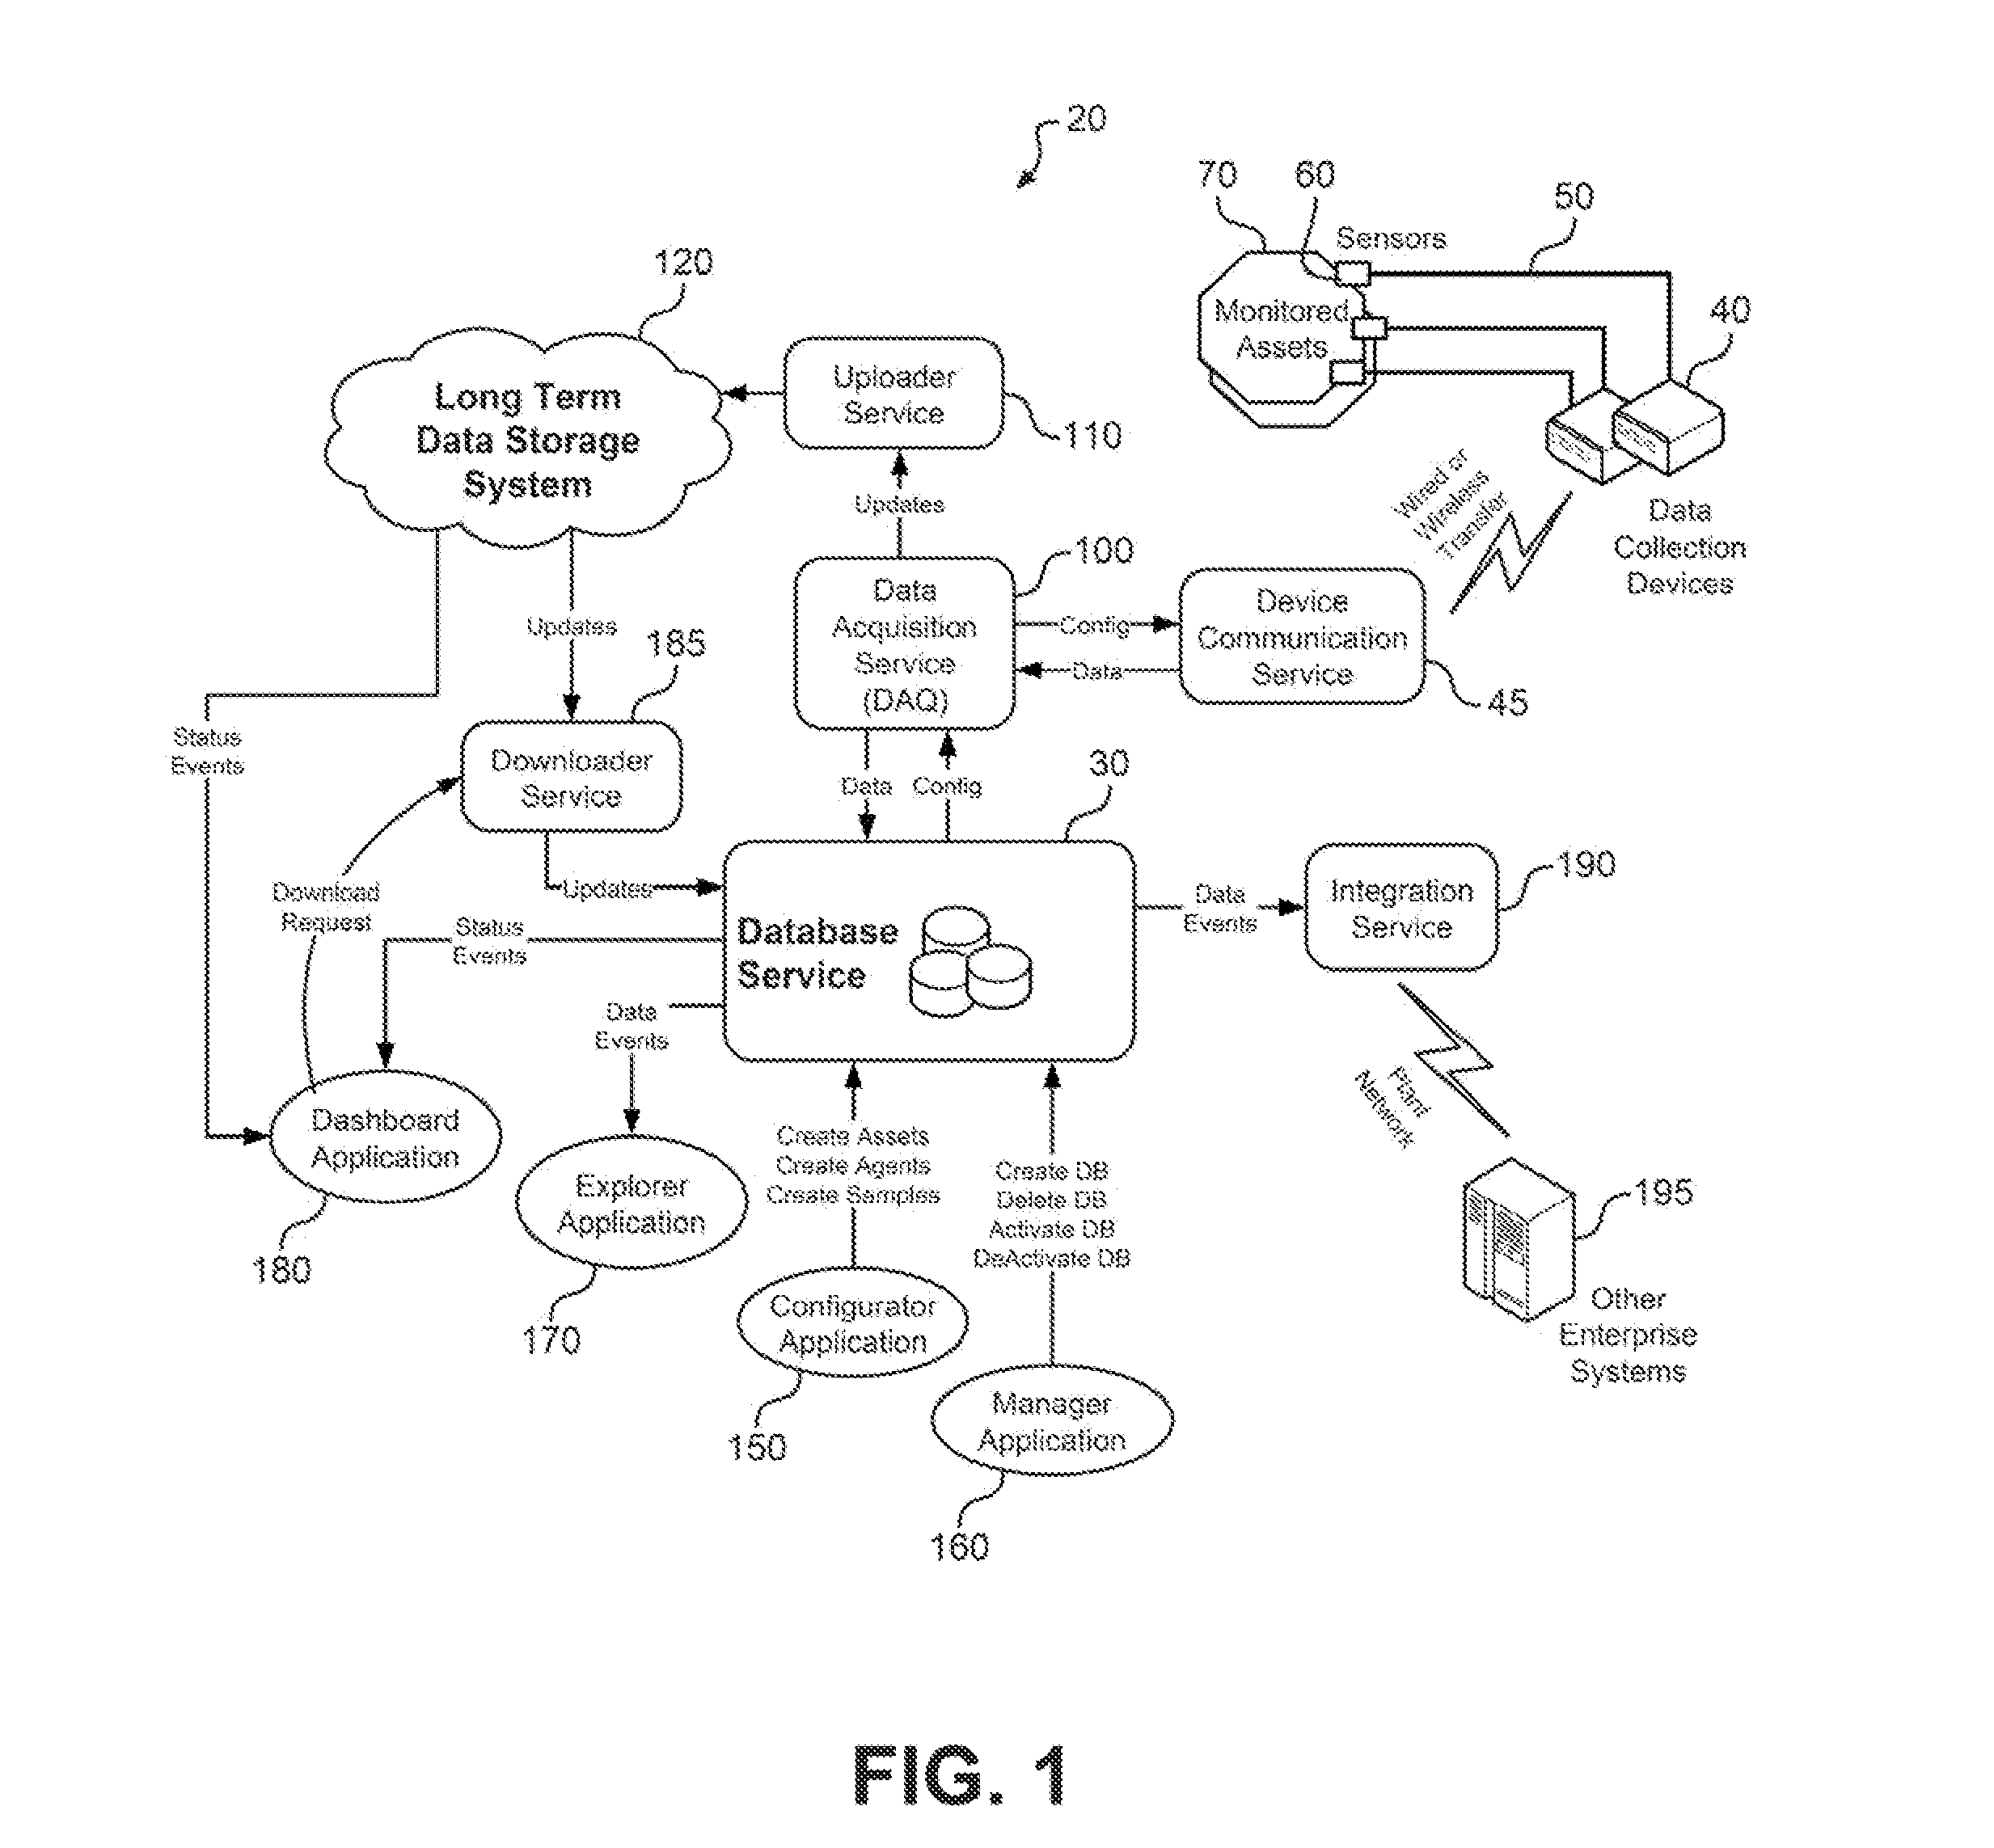 Method and System for Monitoring and Reporting Equipment Operating Conditions and Diagnostic Information